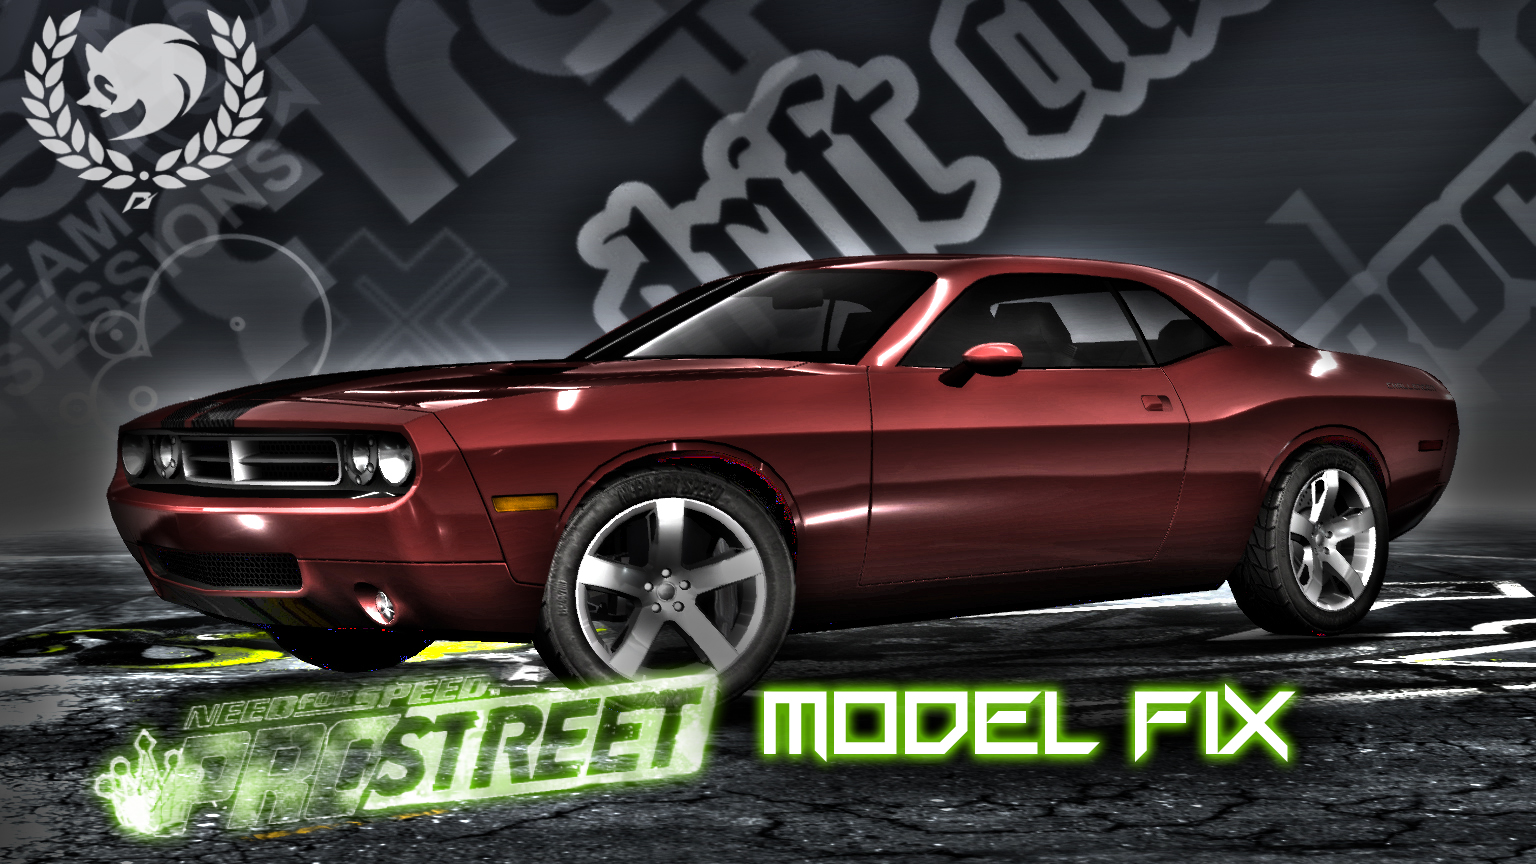 Need For Speed Pro Street Dodge Challenger Concept fix